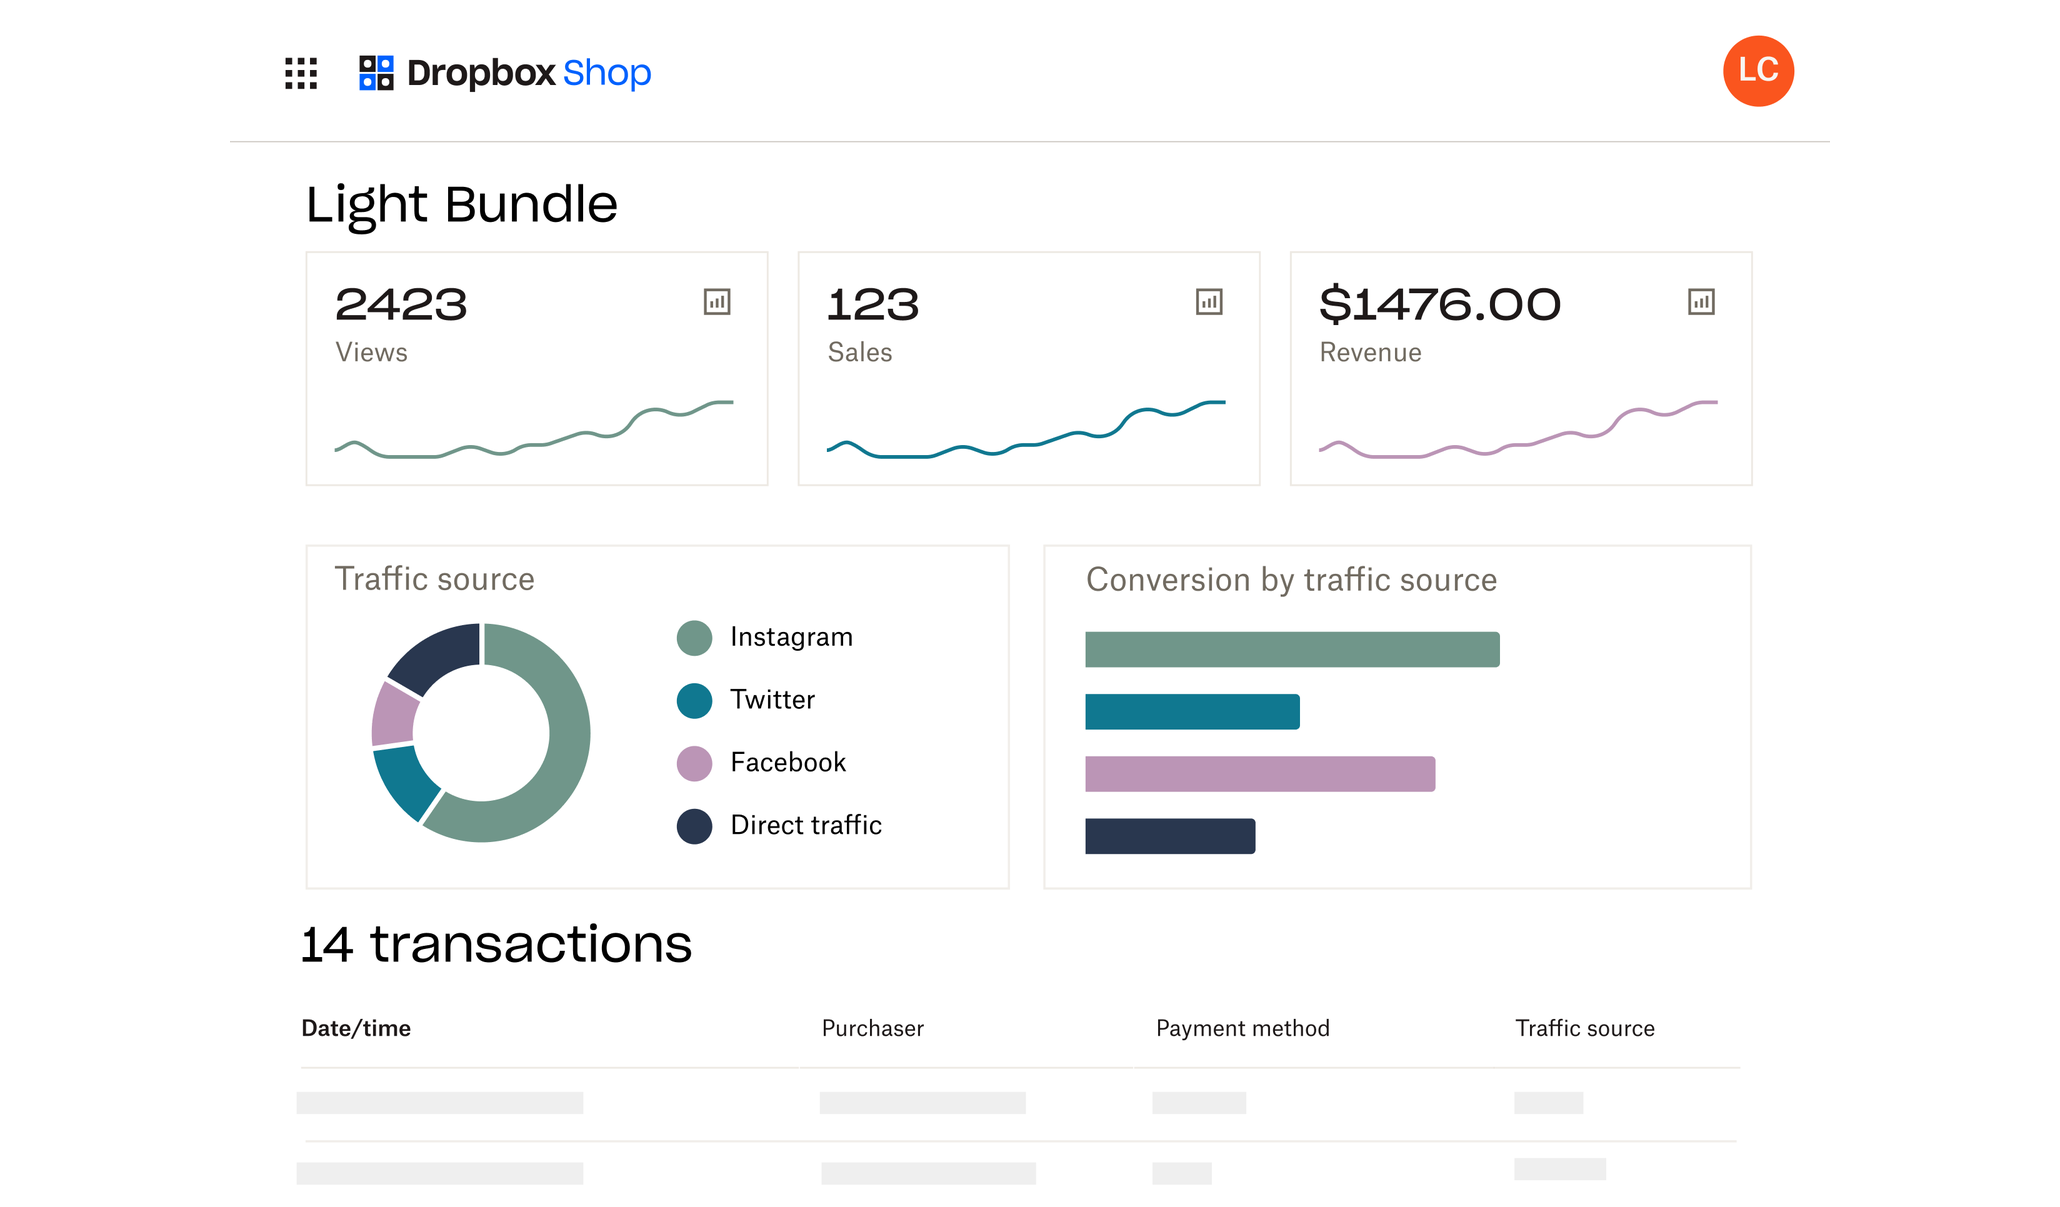 The analytics dashboard for a Dropbox Shop store.